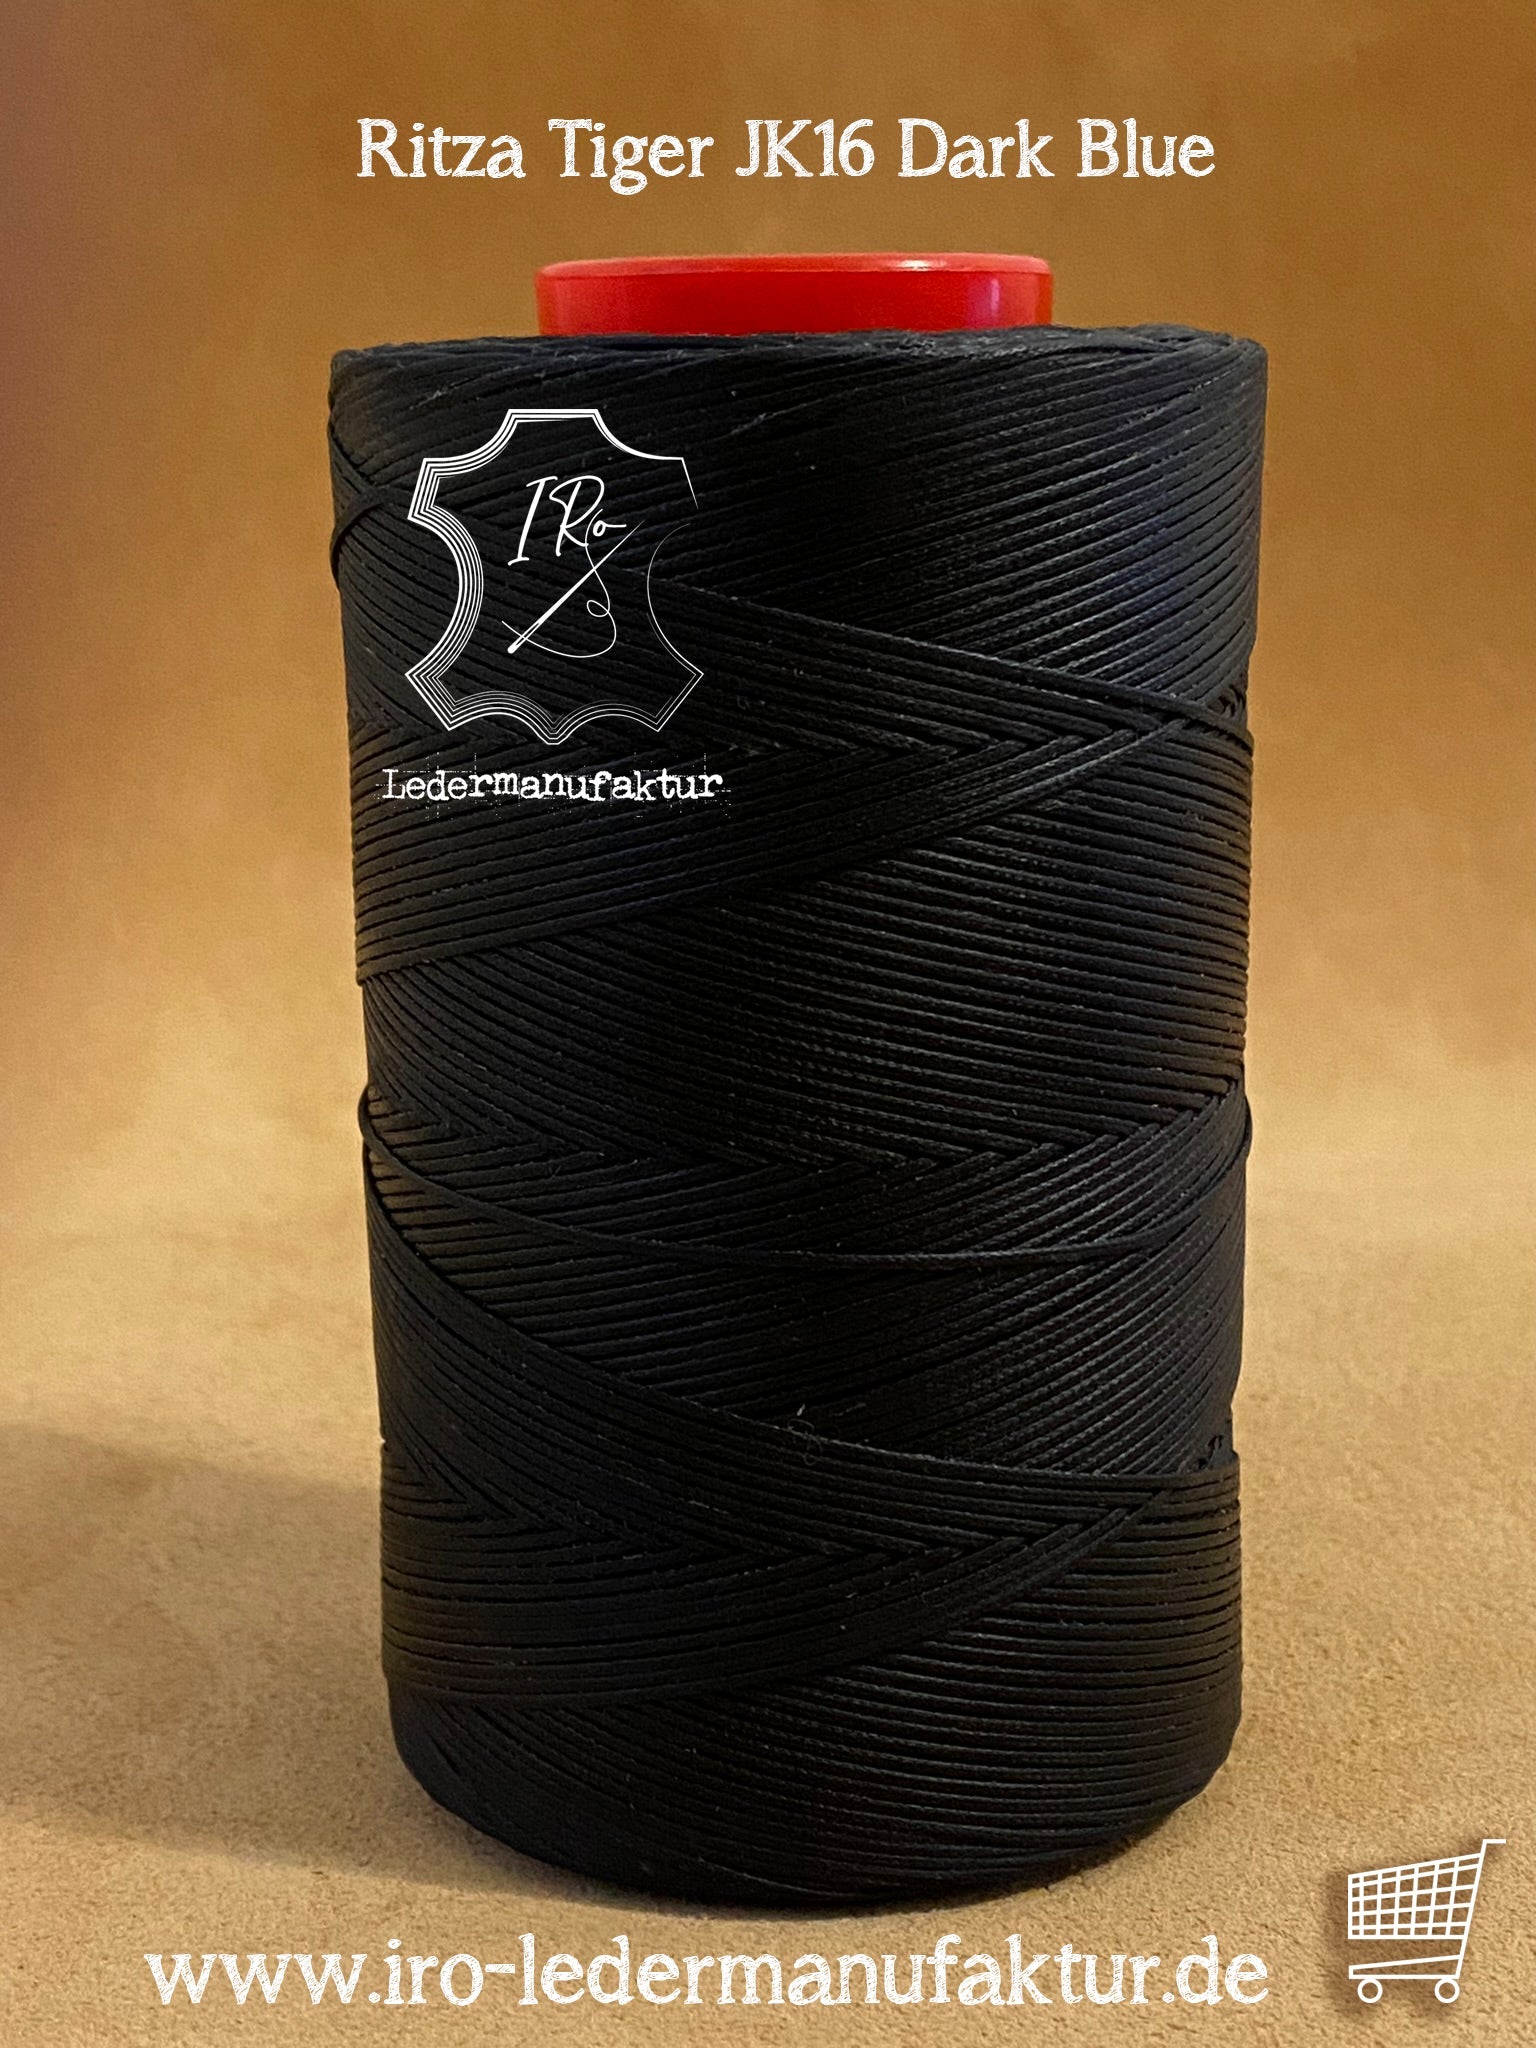 0.6mm Black Ritza 25 Tiger Wax Thread For Hand Sewing. 25 - 1000m length  (50m)